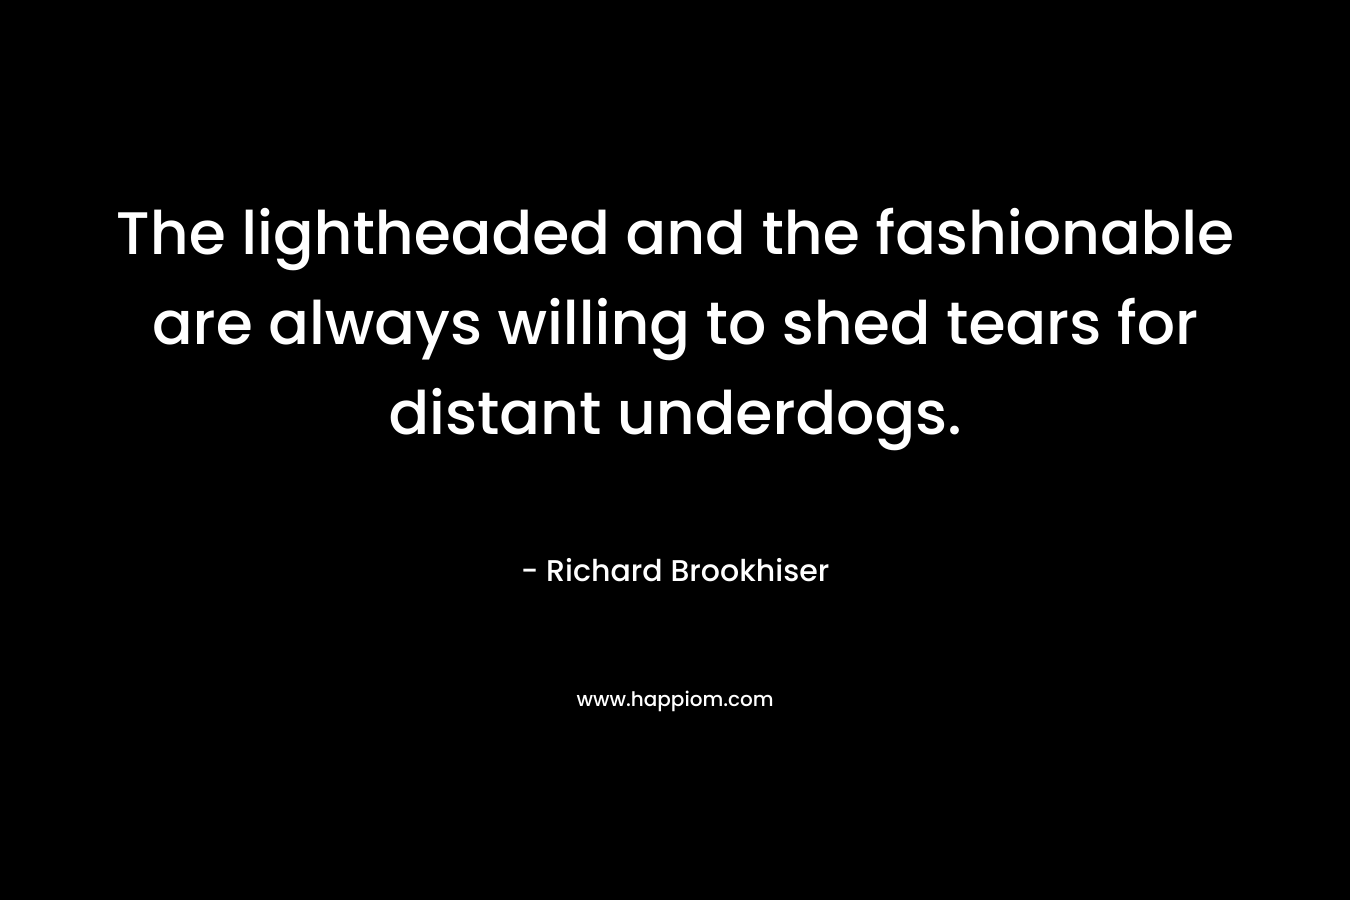 The lightheaded and the fashionable are always willing to shed tears for distant underdogs. – Richard Brookhiser